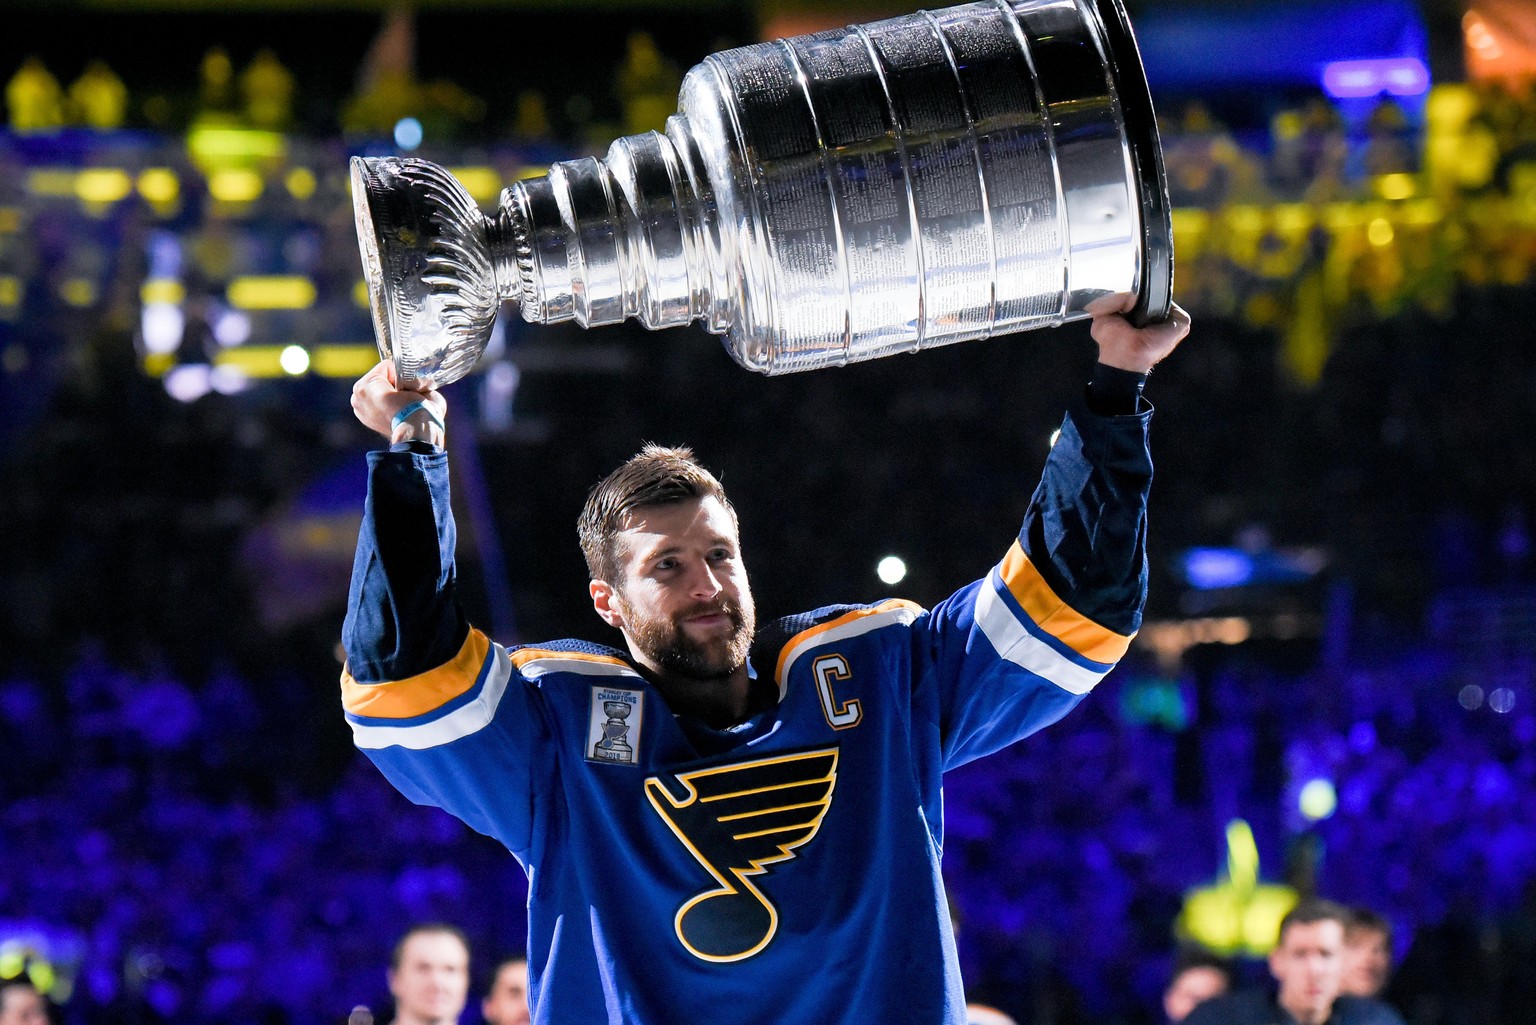 Oct 02, 2019: St. Louis Blues defenseman Alex Pietrangelo 27 stakes the Stanley Cup around during pregame ceremonies in the opening night of the National Hockey League in a game between the Washington ...